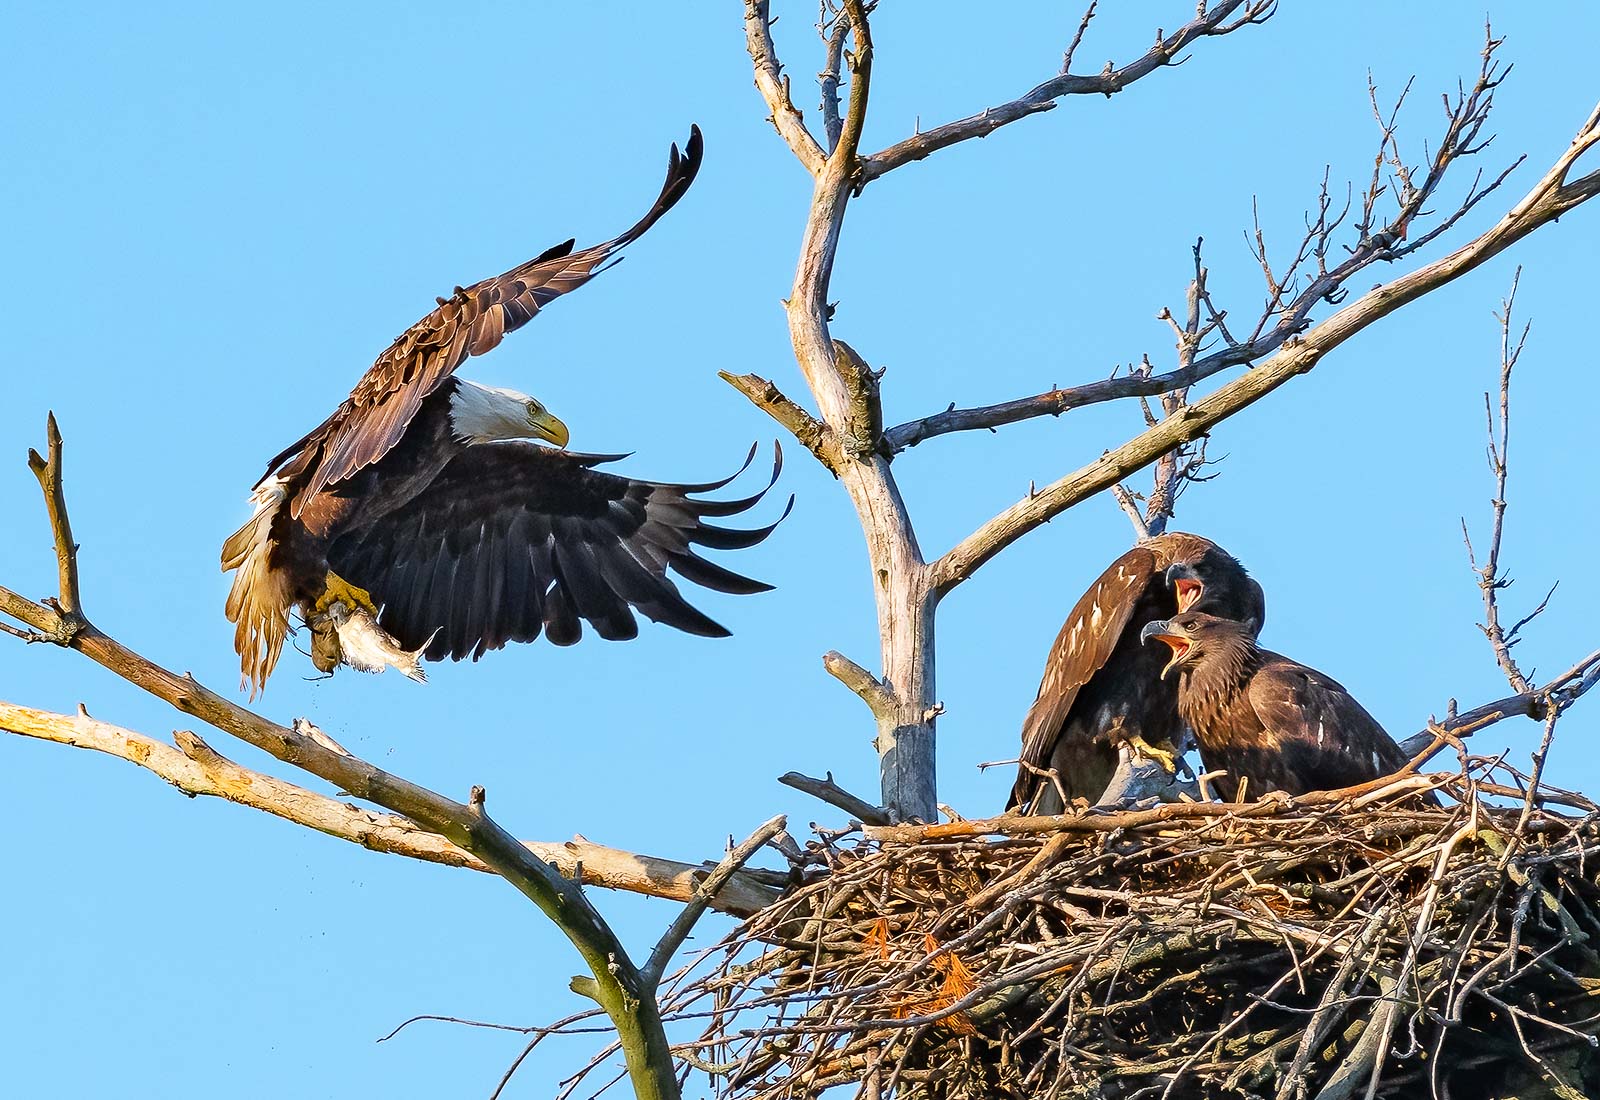 Eagle delivers fish to the eaglets in the nest